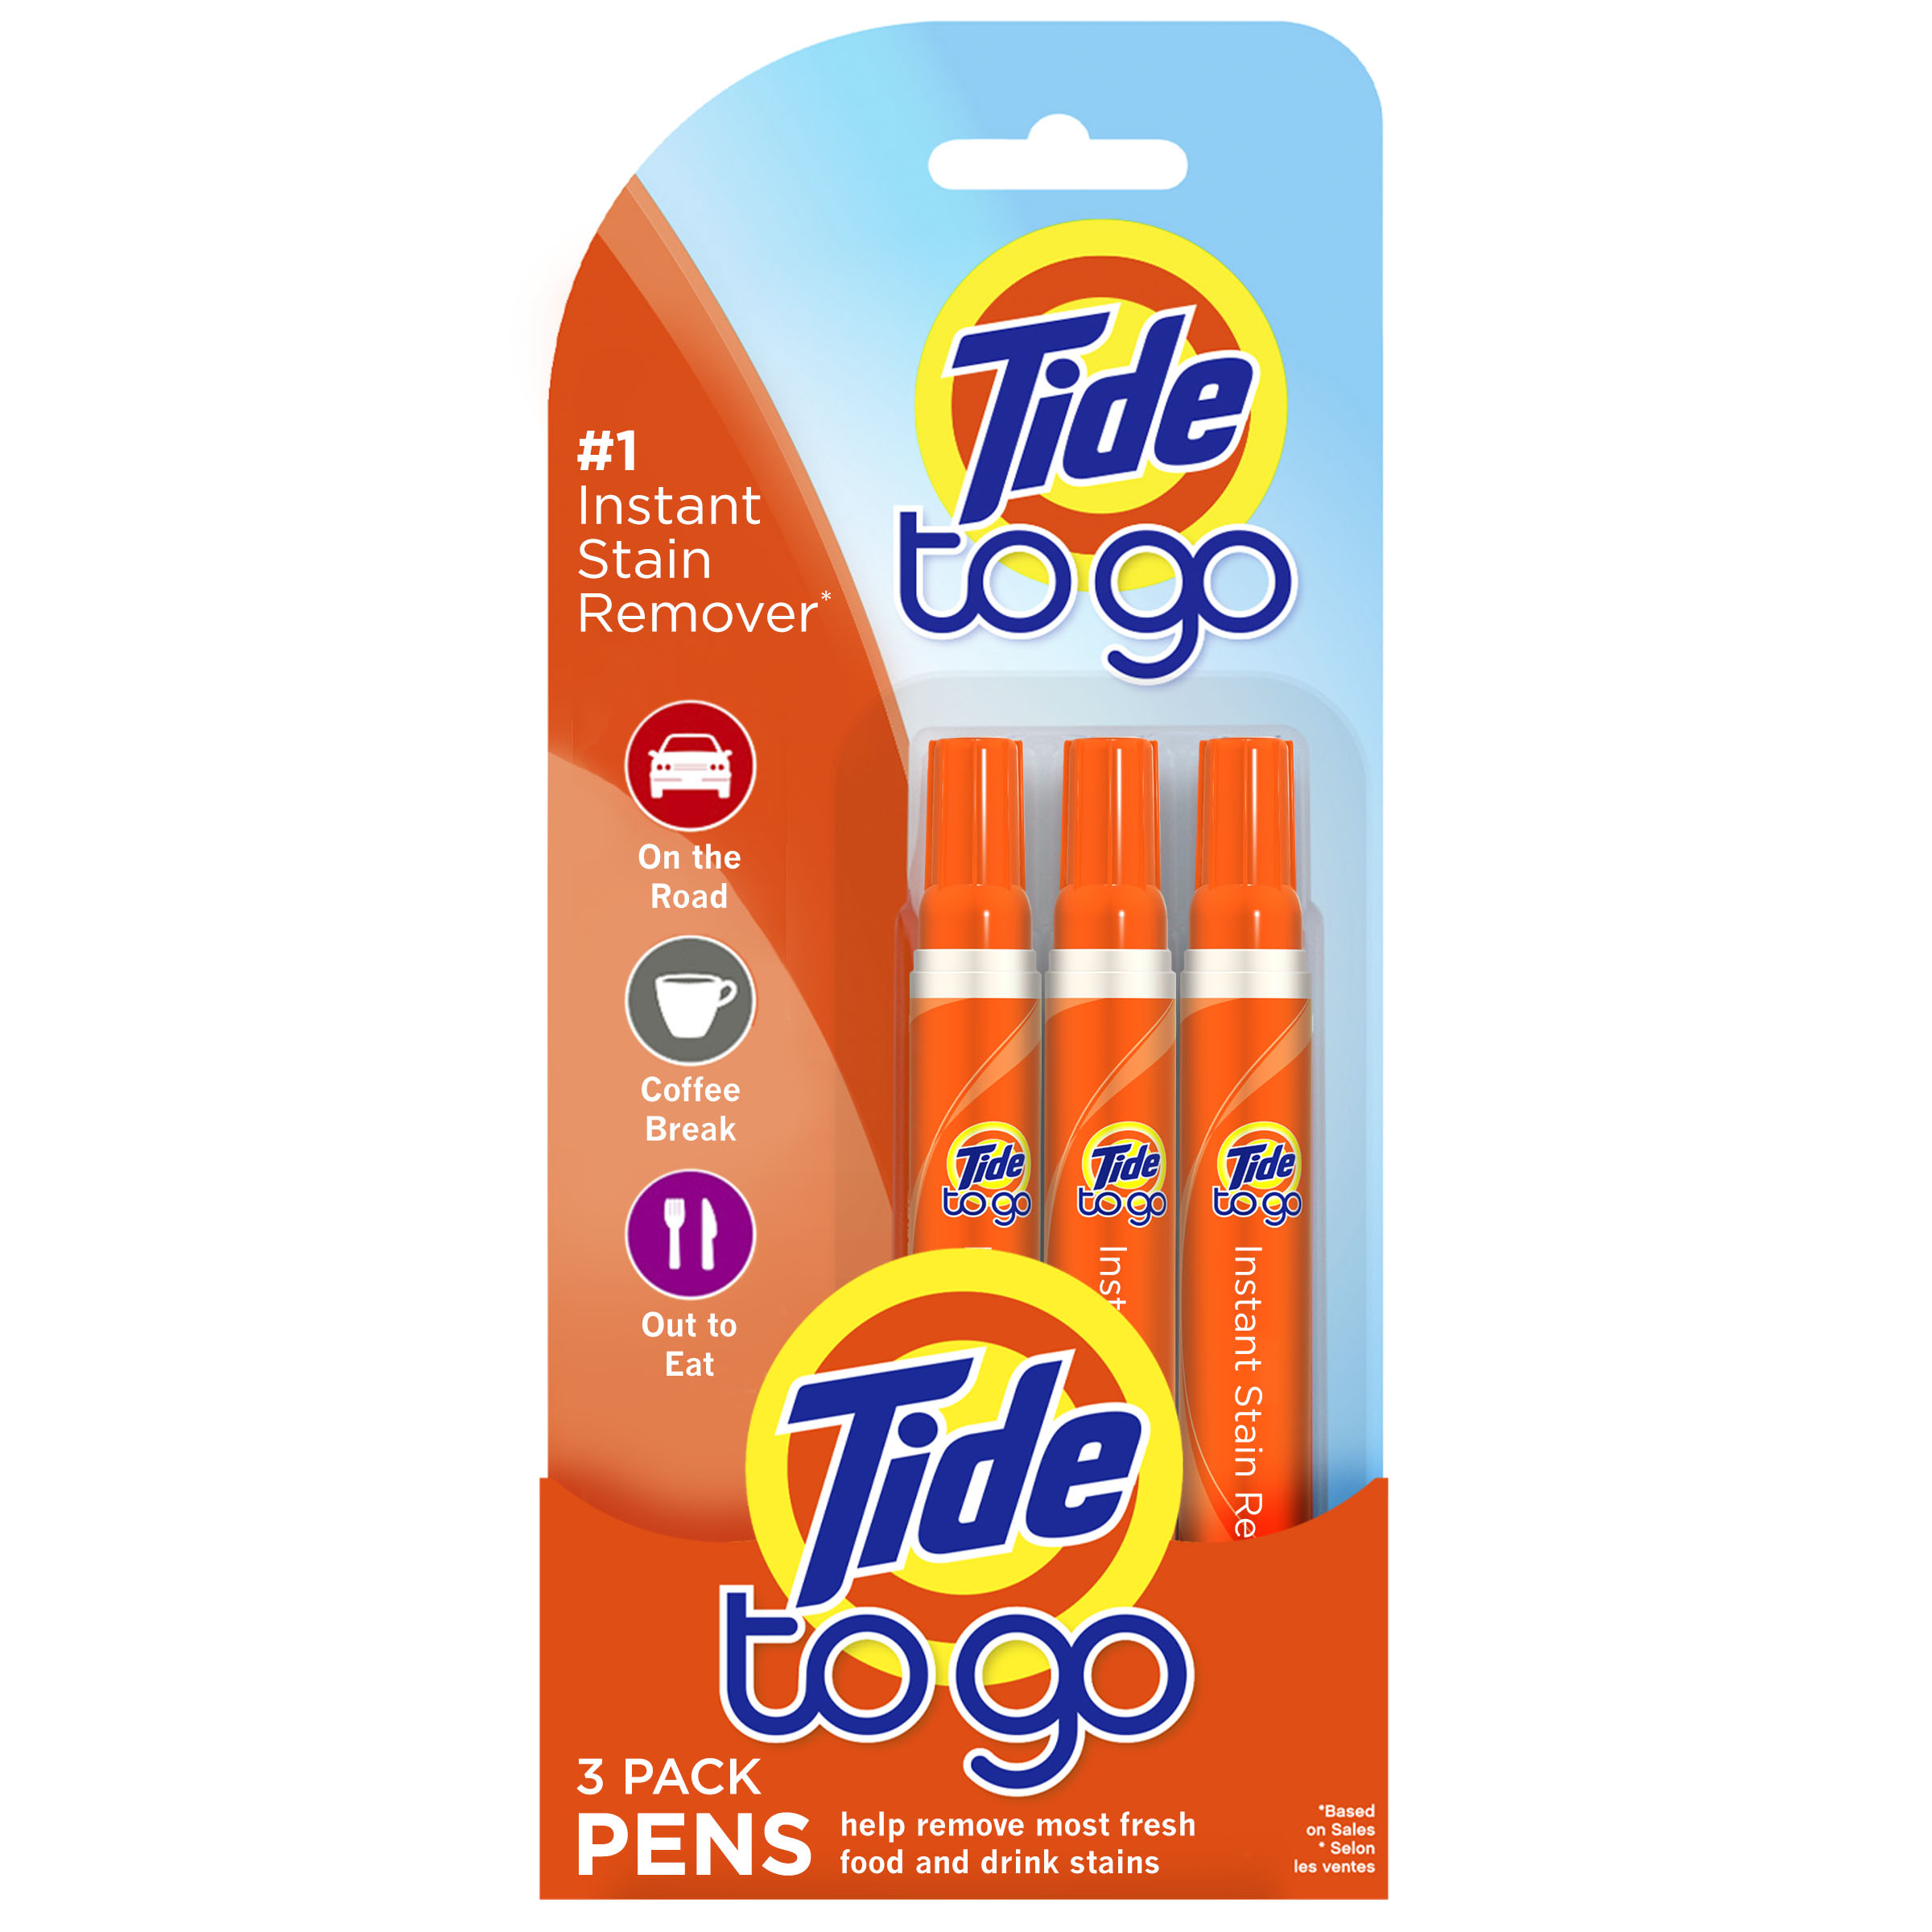 Tide To Go Instant Stain Remover Pen and Laundry Spot Cleaner, Travel Size Stain Sticks, 3 Count - image 13 of 14